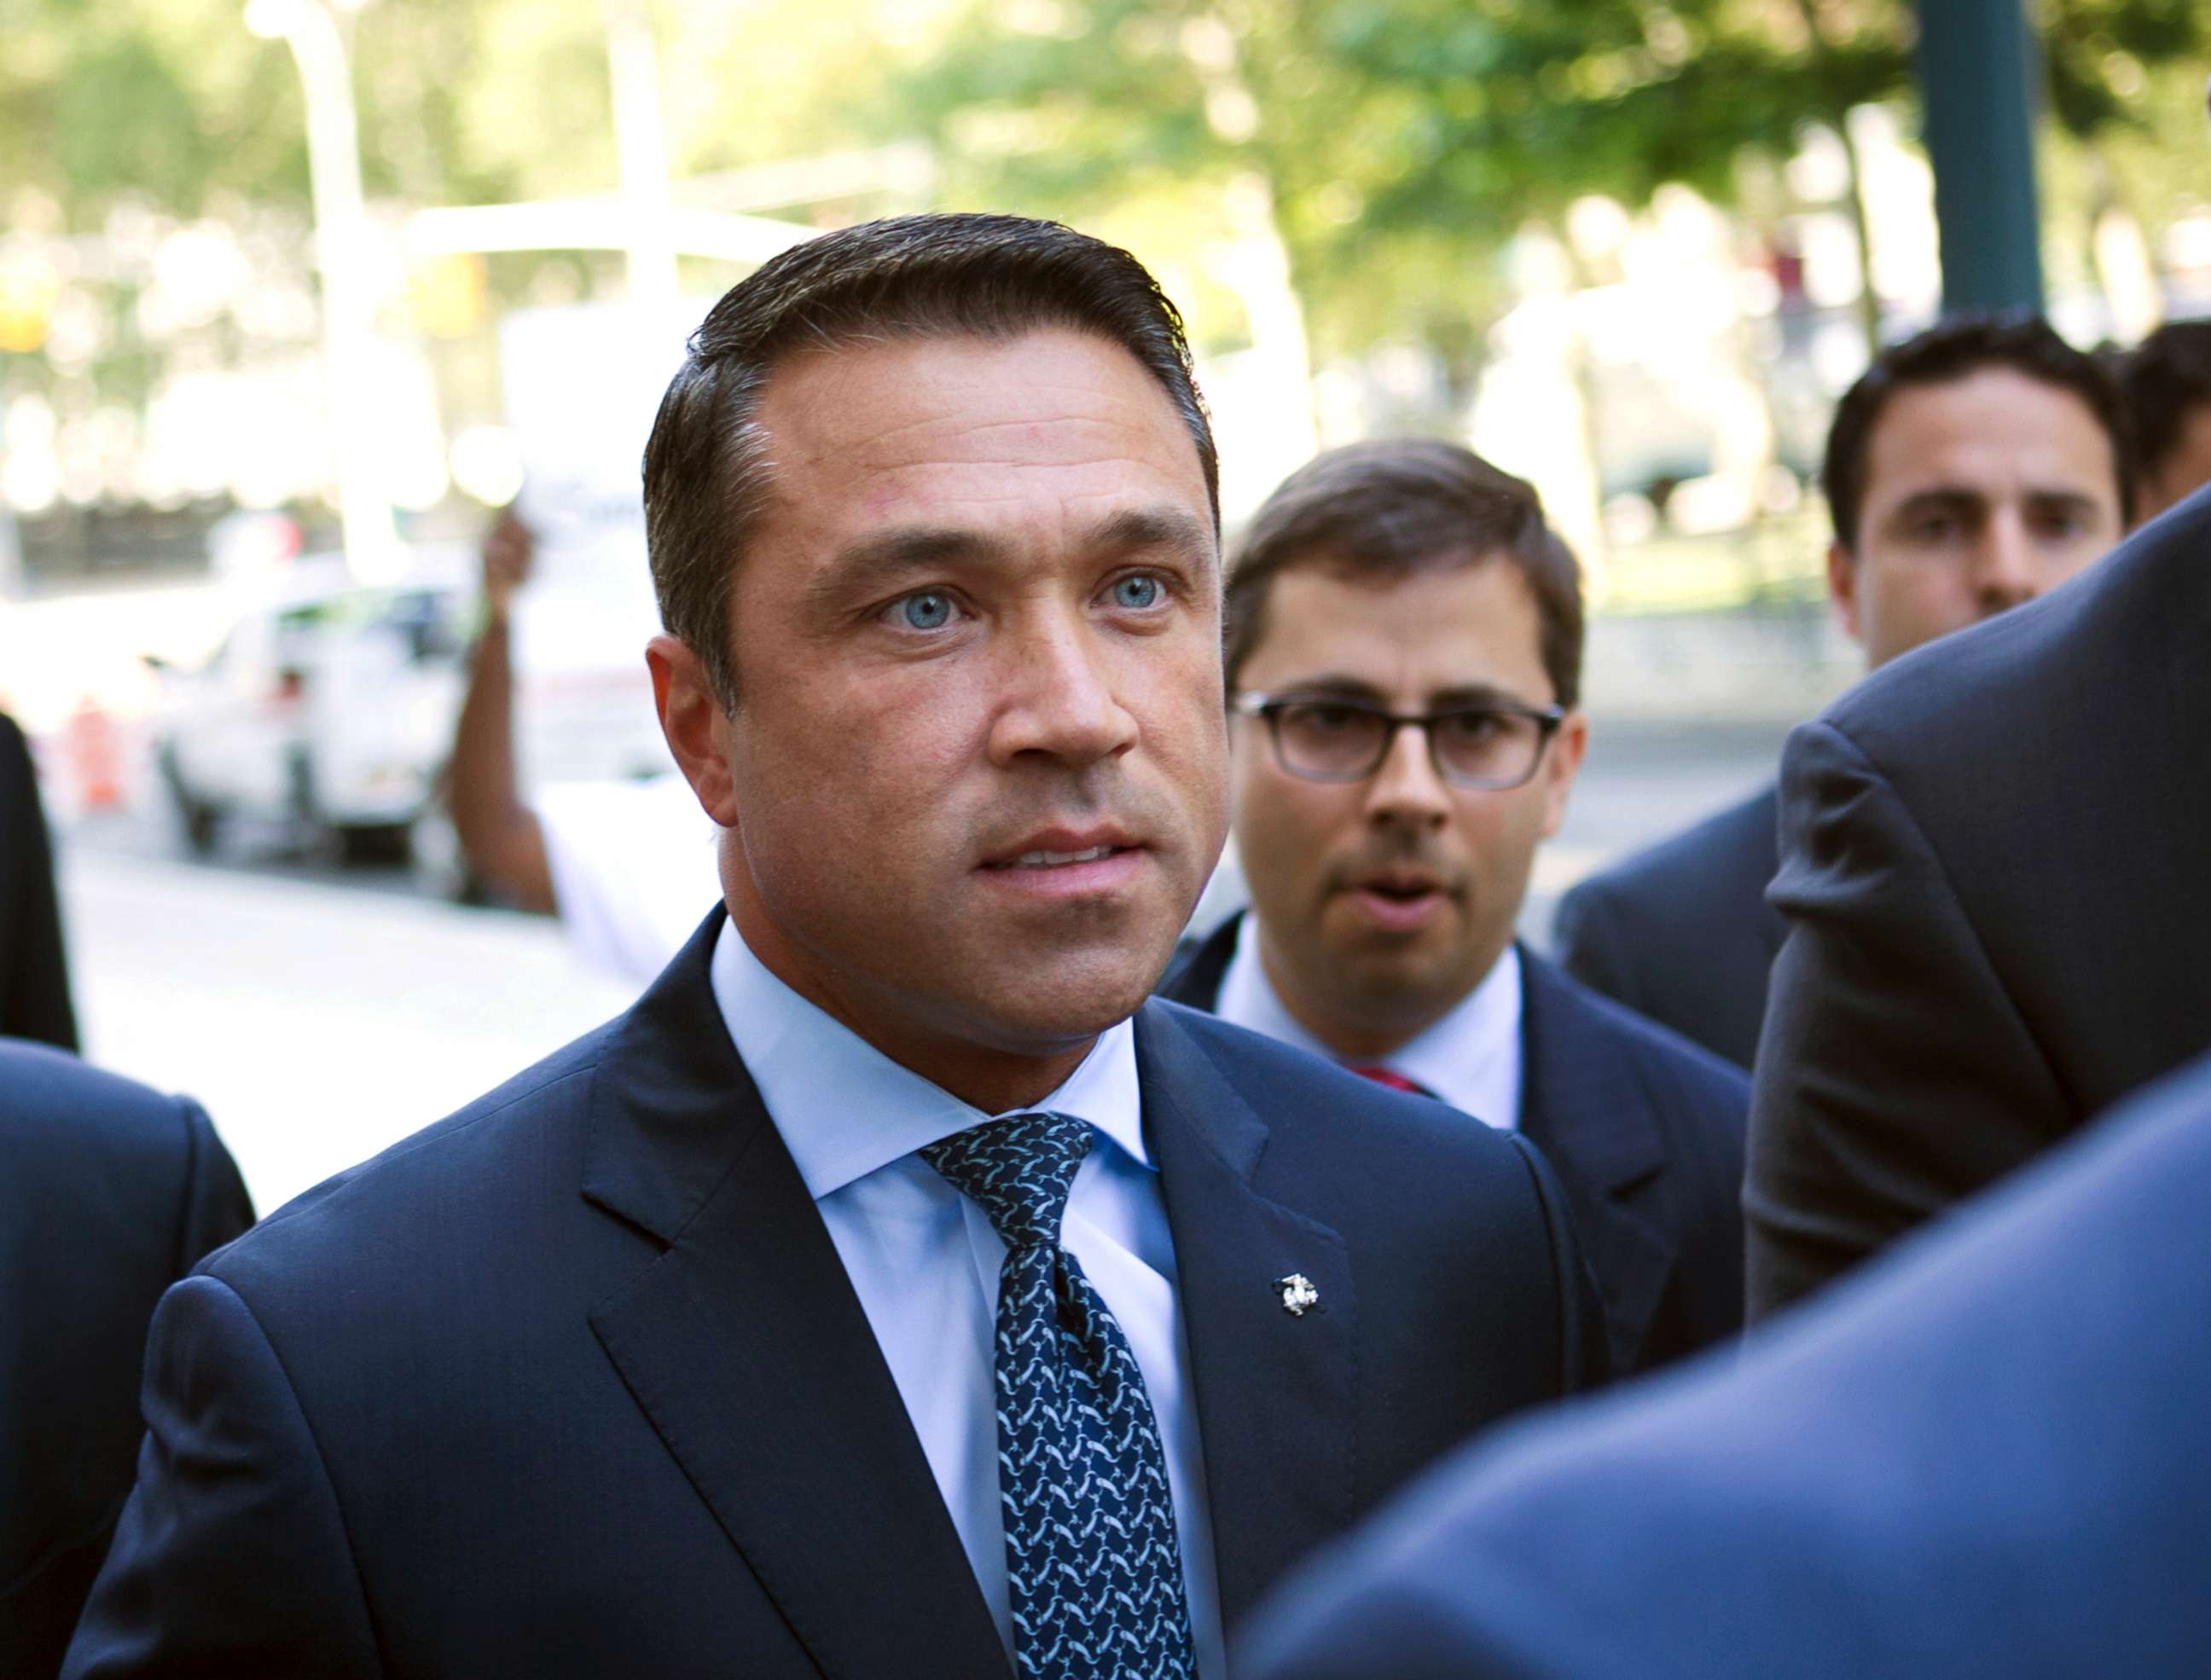 PHOTO: Former Rep. Michael Grimm arrives ahead of his sentencing for aiding in filing a false tax return, at federal court in the Brooklyn borough of New York, on July 17, 2015.